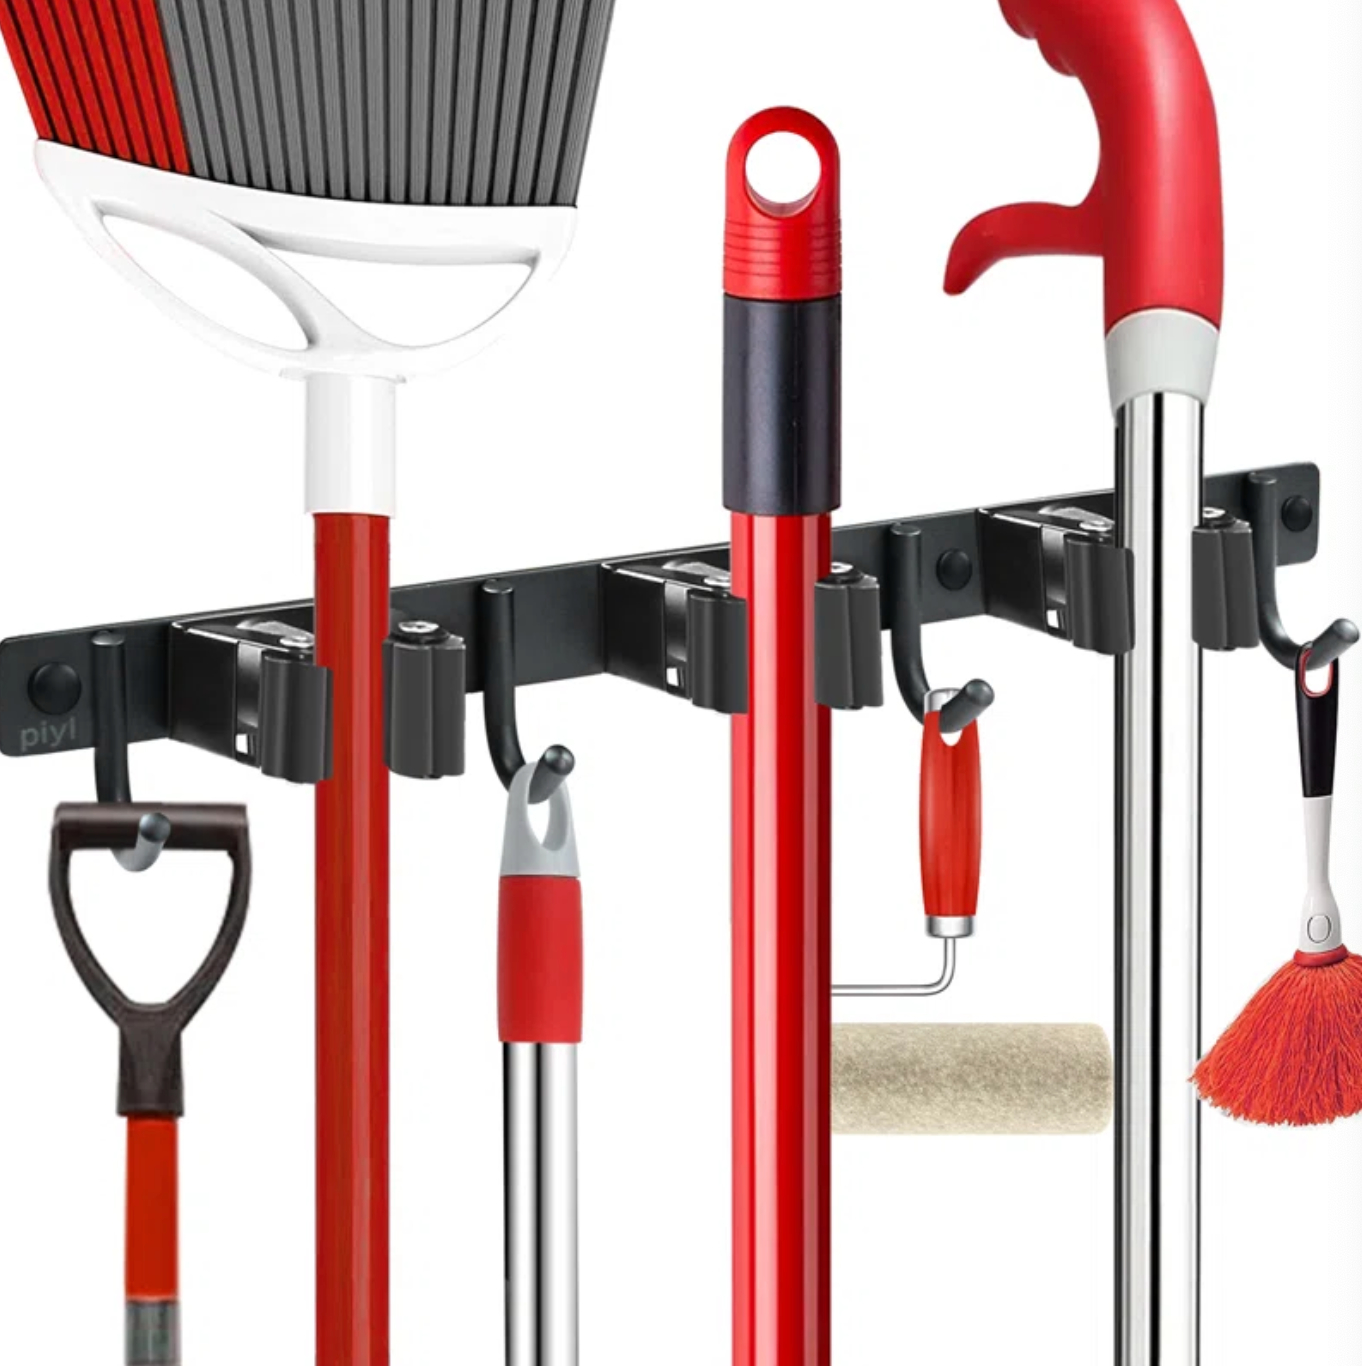 a close up of a broom and mop organizer holding red tools